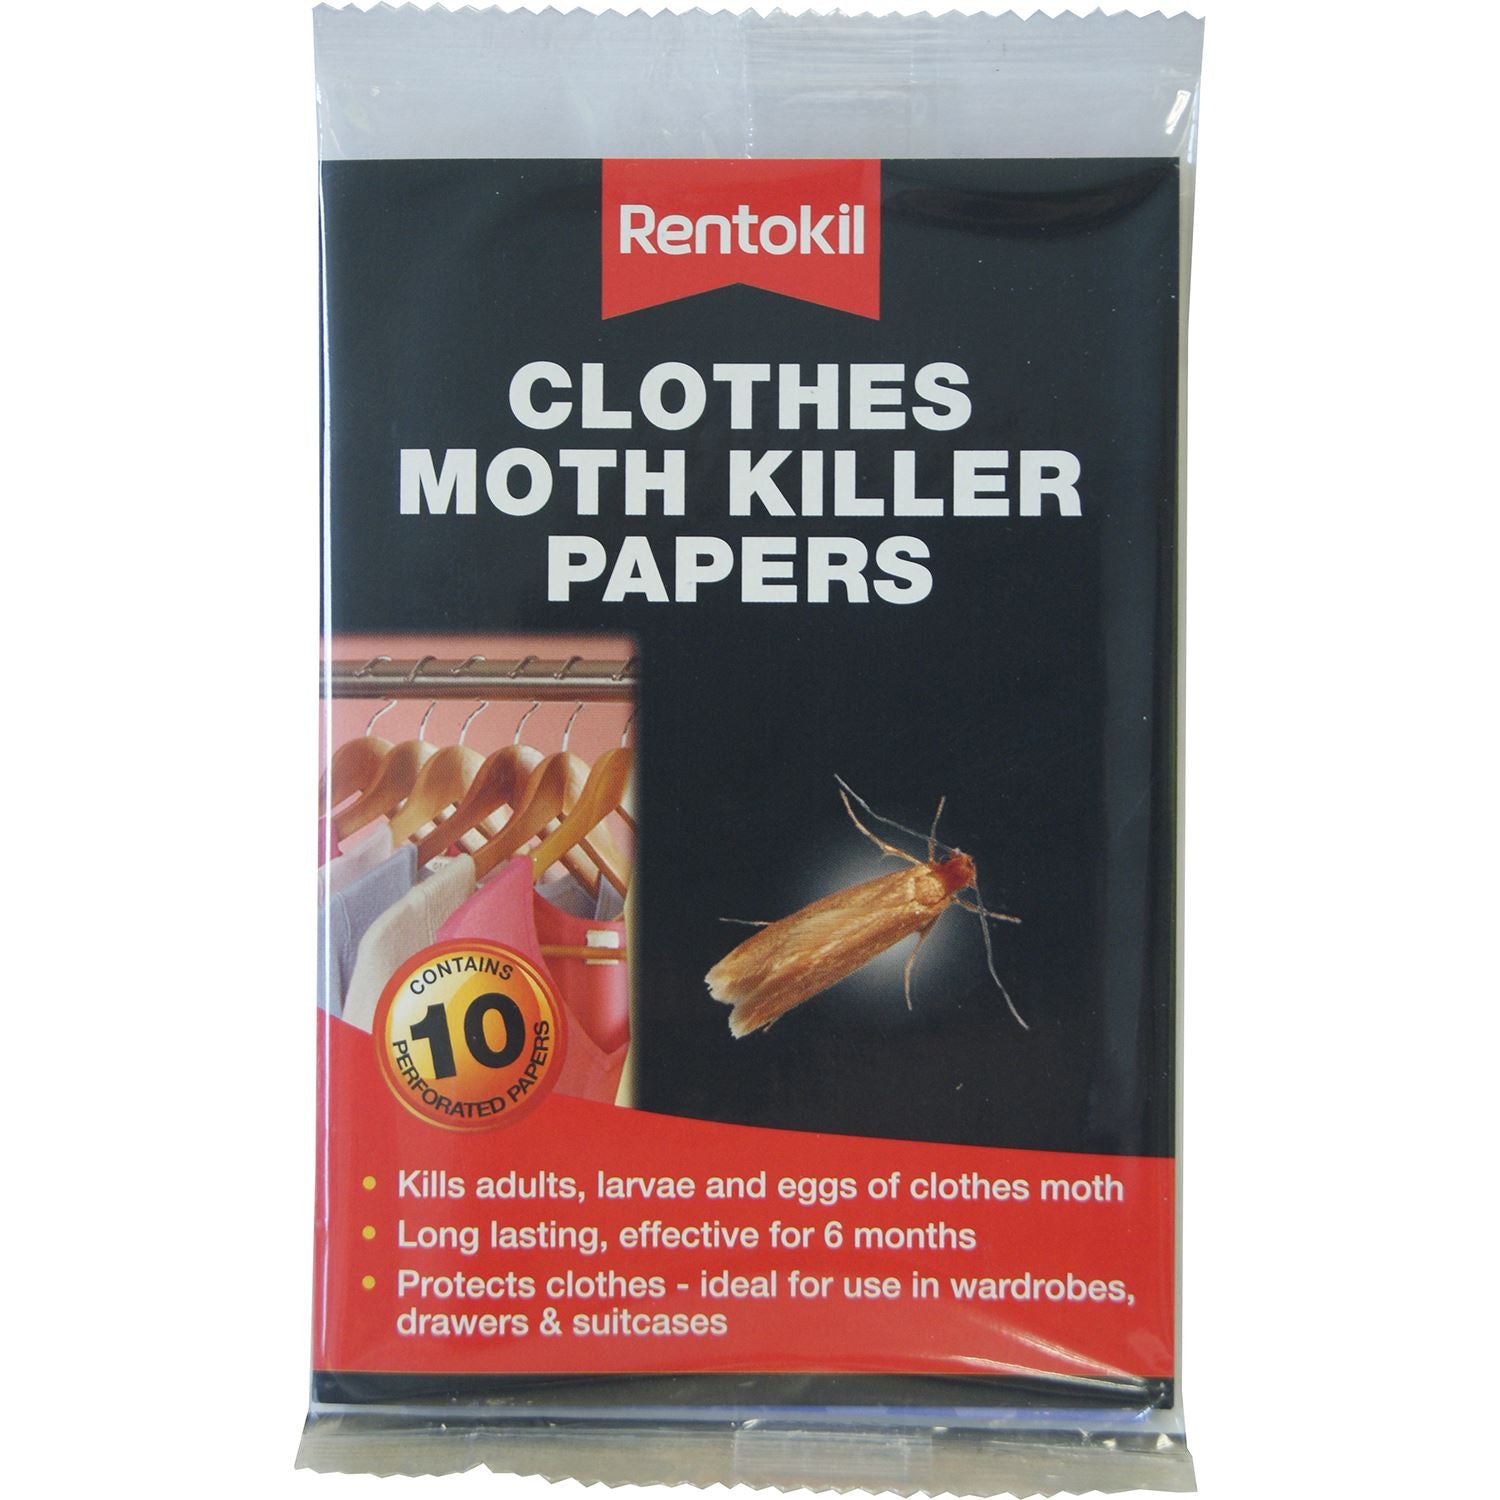 Rentokil Clothes Moth Killer Papers - Just Horse Riders